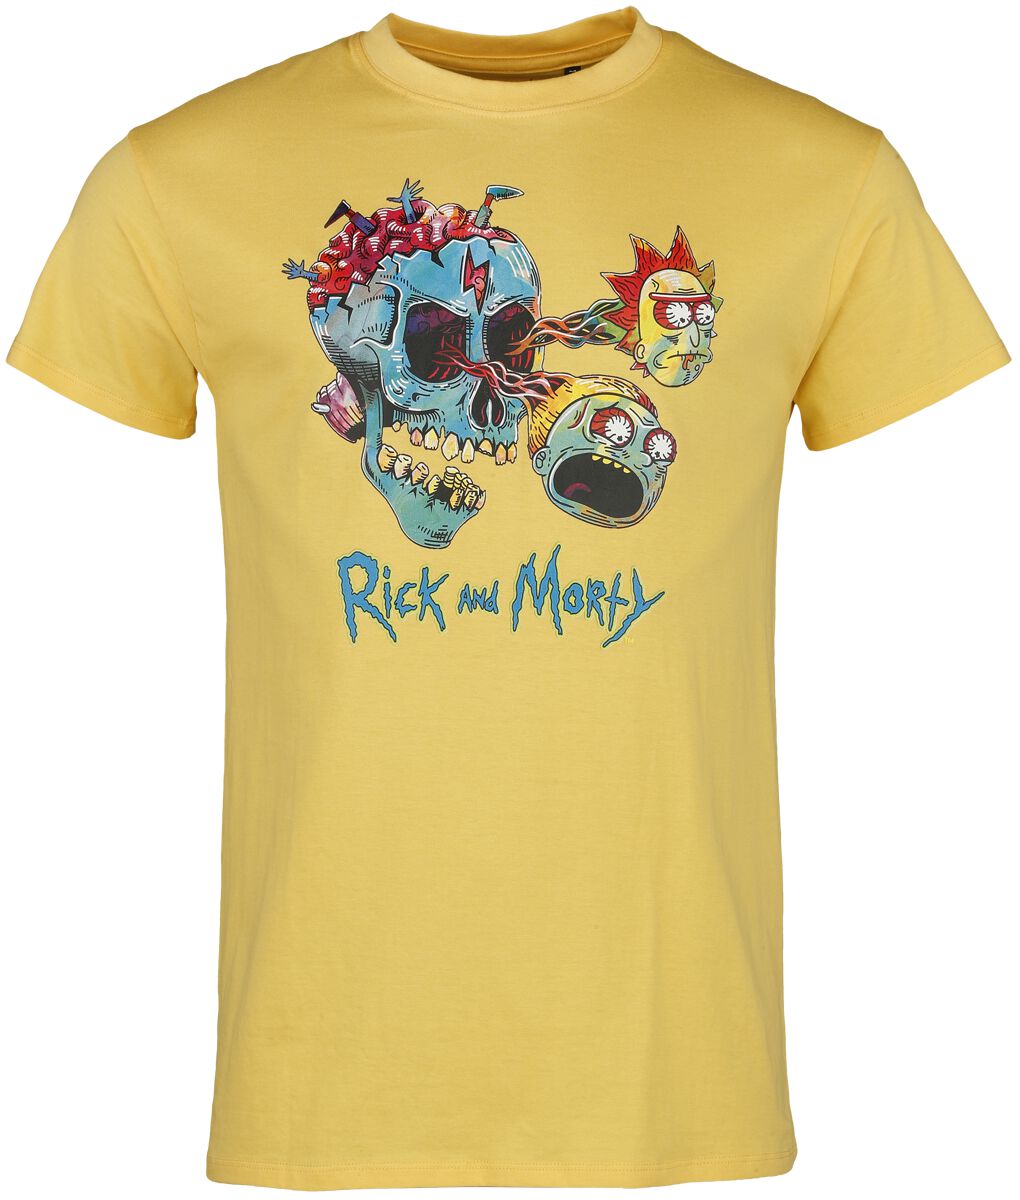 Rick And Morty Summer Vibes T-Shirt gelb in XXL von Rick And Morty